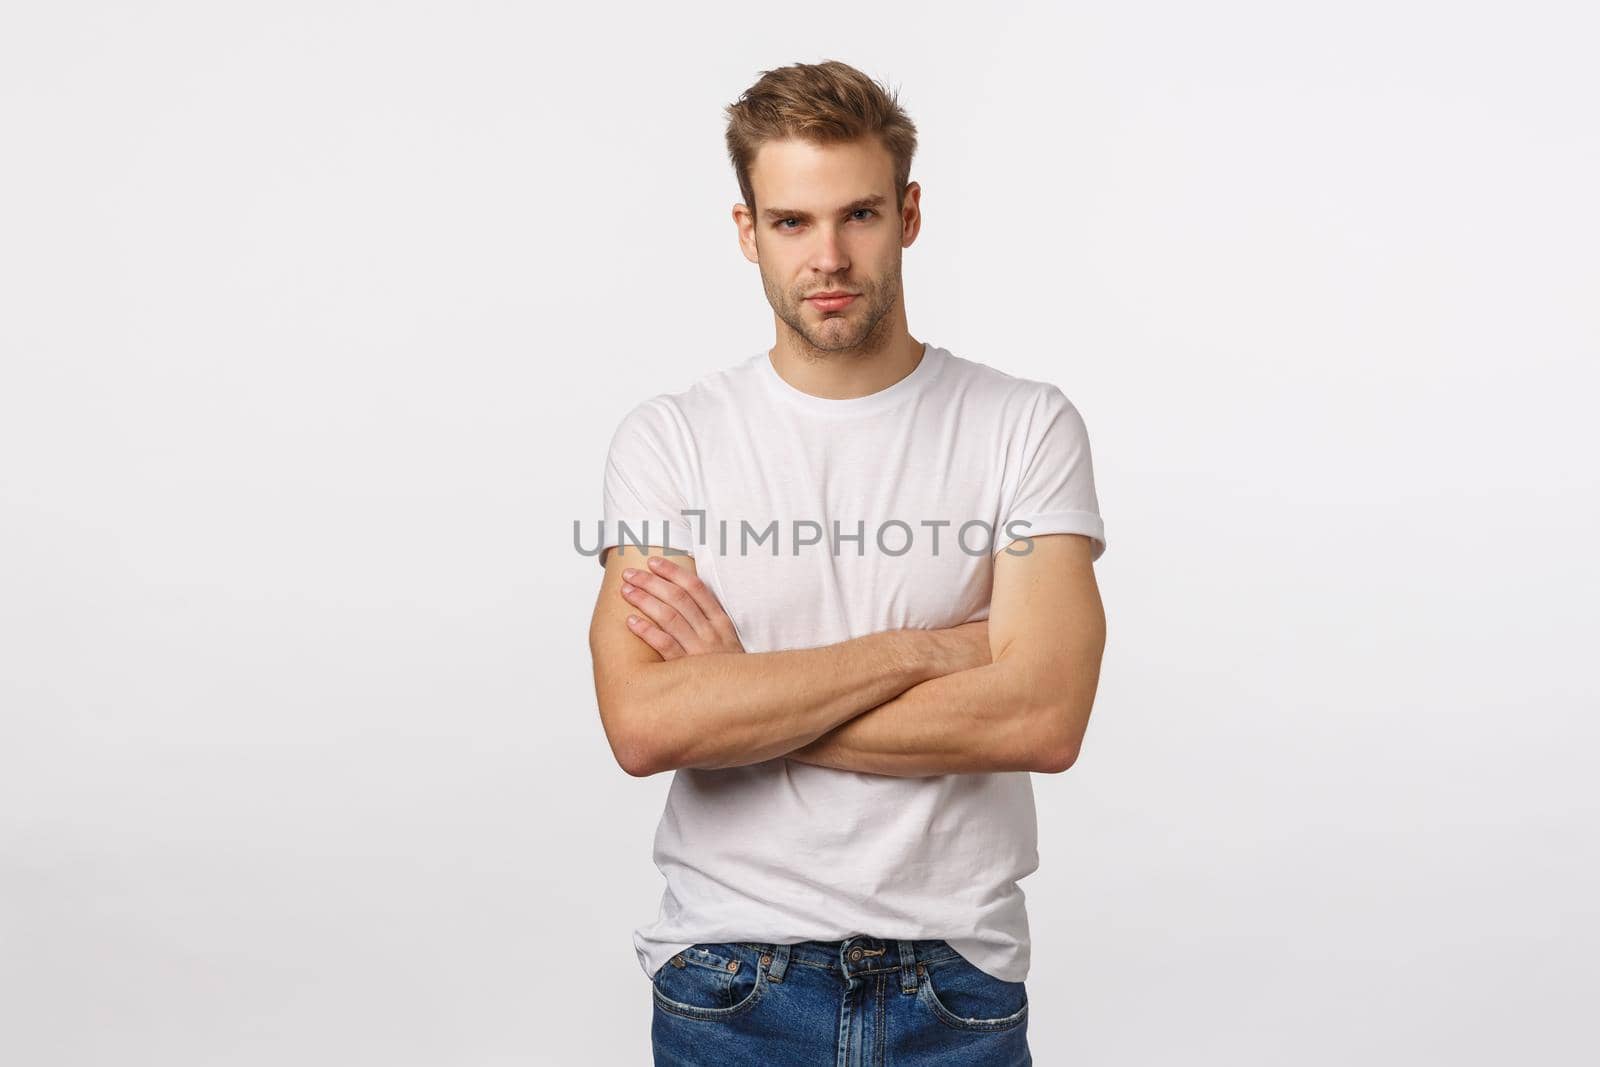 Confident mature good-looking, athletic blond guy in white t-shirt, cross hands over chest and smiling with assertive, determined expression, involved in interesting conversation, ready action.